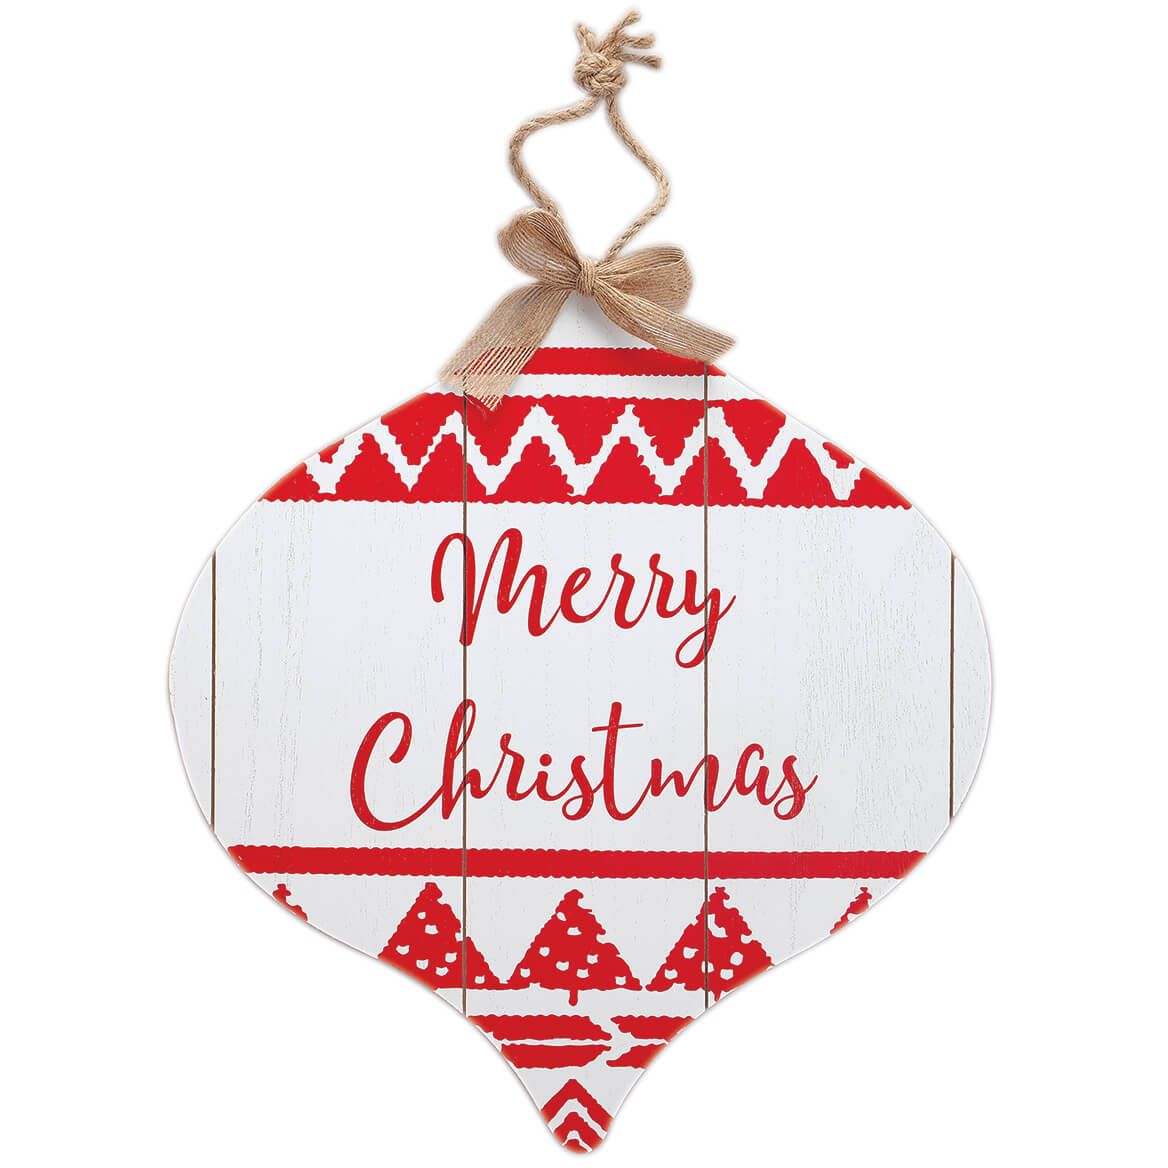 Personalized Ornament Wall Hanging by Holiday Peak™ + '-' + 373505